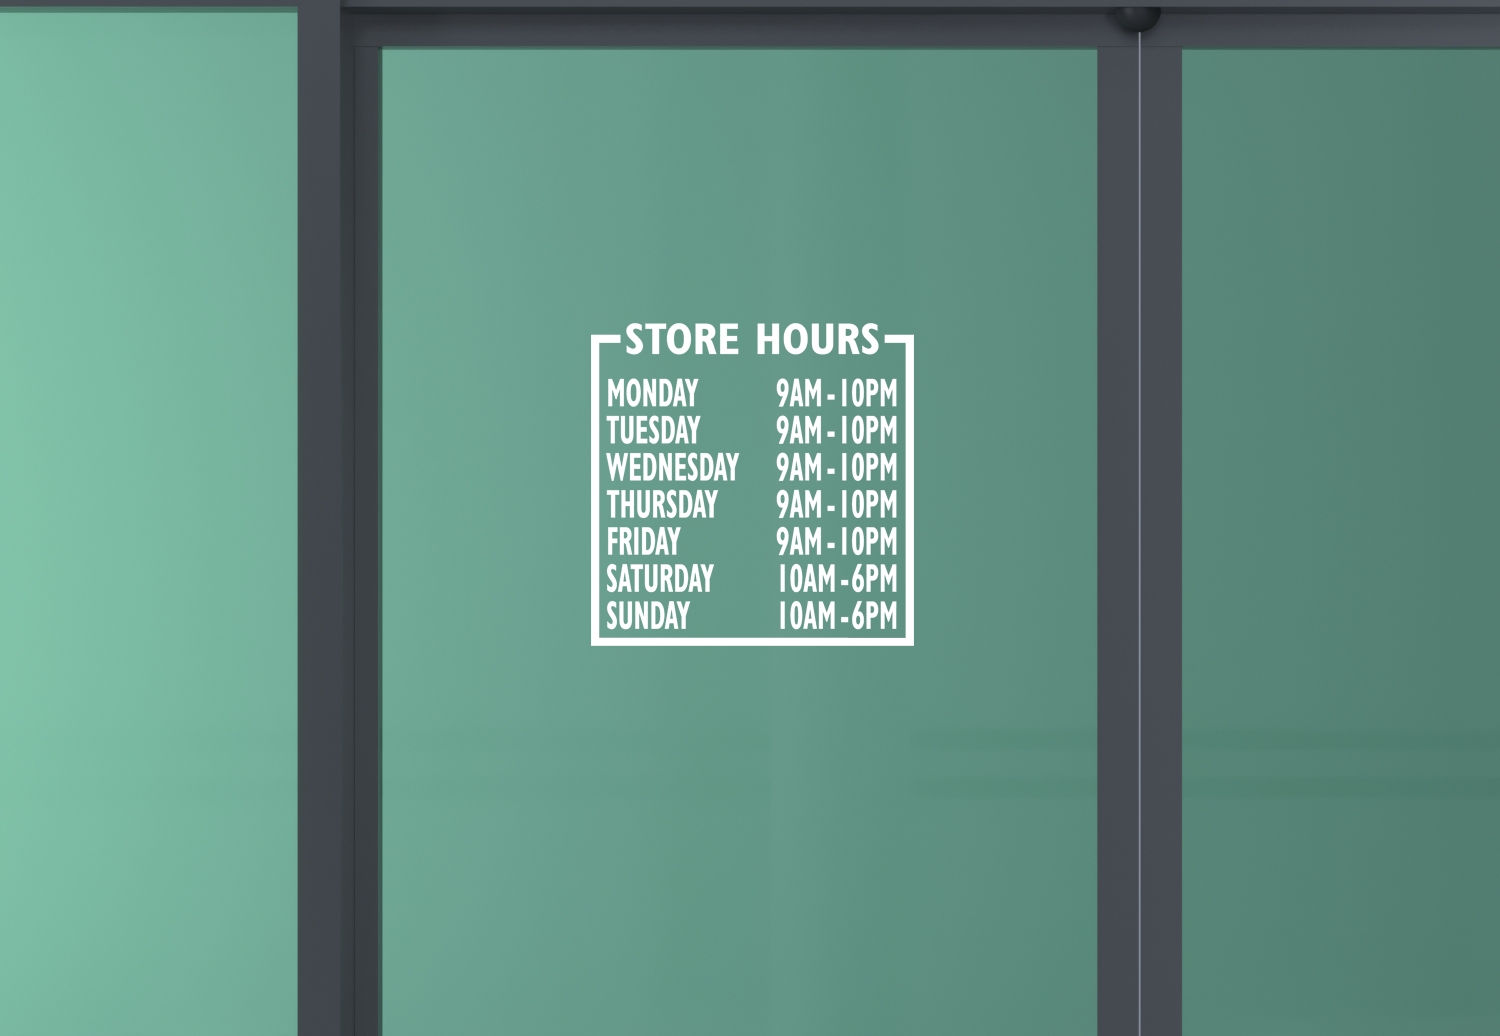 Business Hours Store Front Hours Decal.